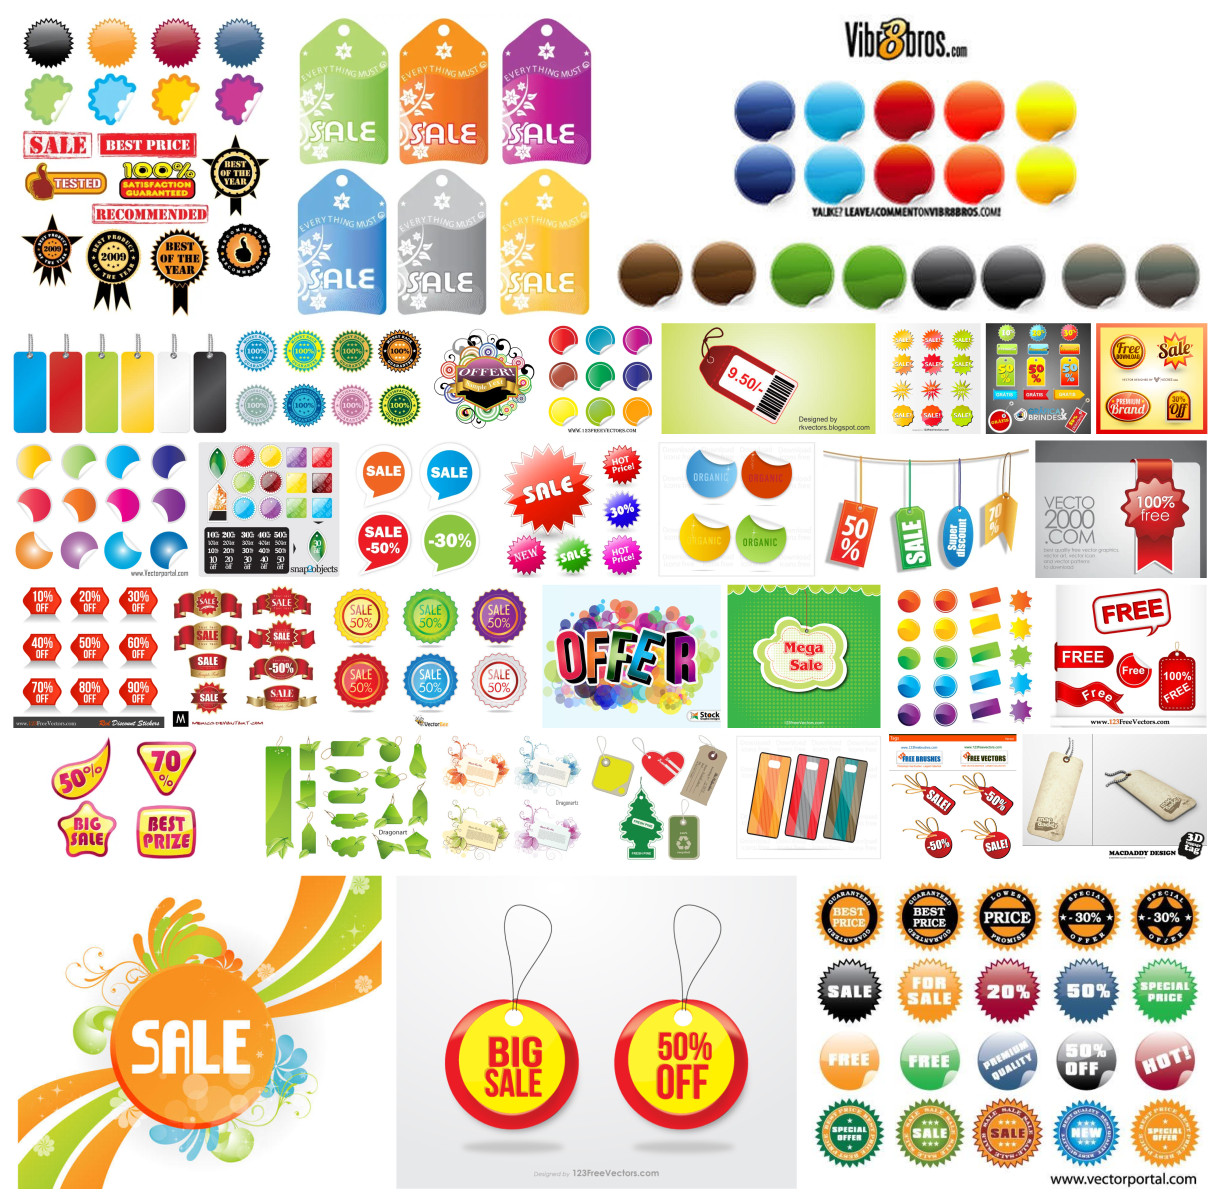 Savings Galore: 35 Free Vector Sale Designs to Boost Your Promotion